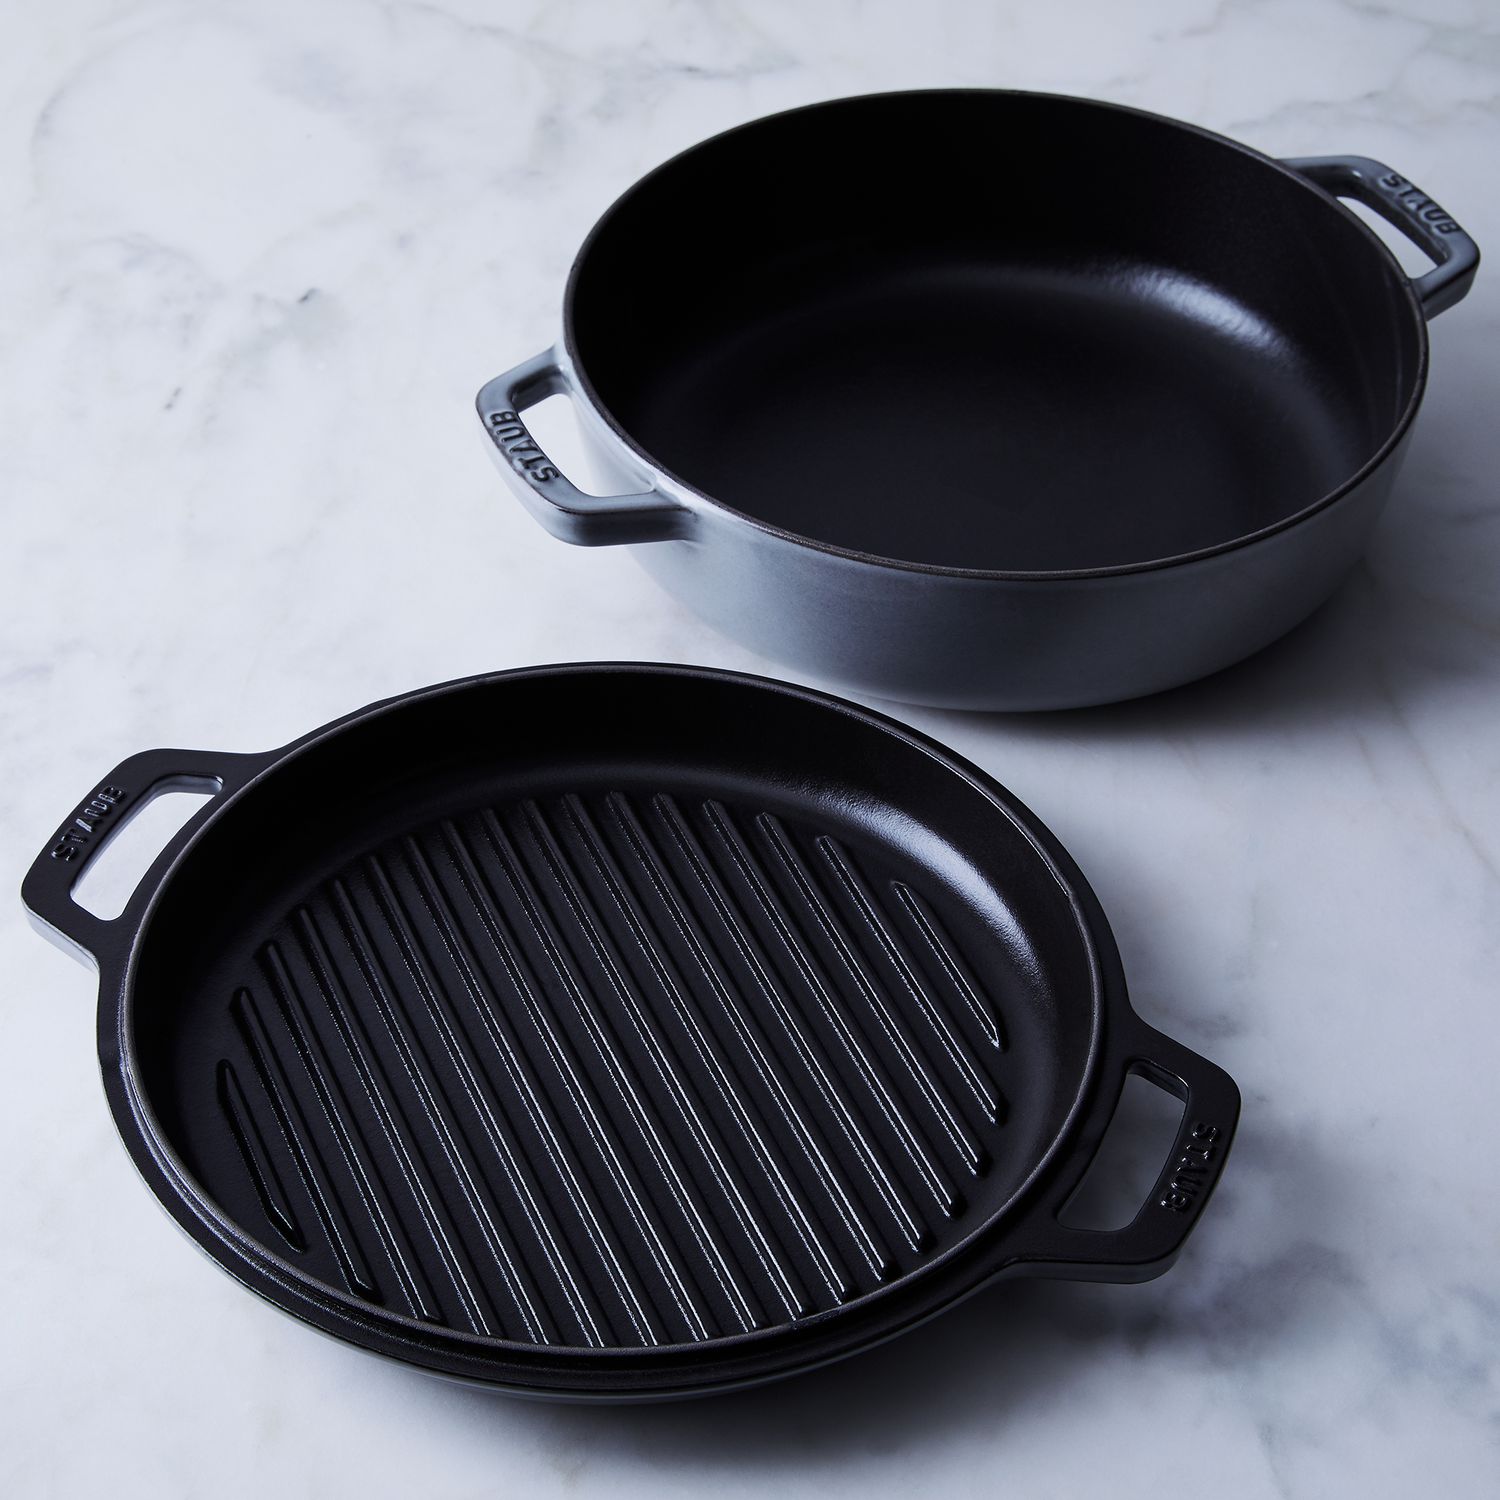 Food52 x Staub Cast Iron 2-in-1 Grill Pan & Cocotte with Lid, 4